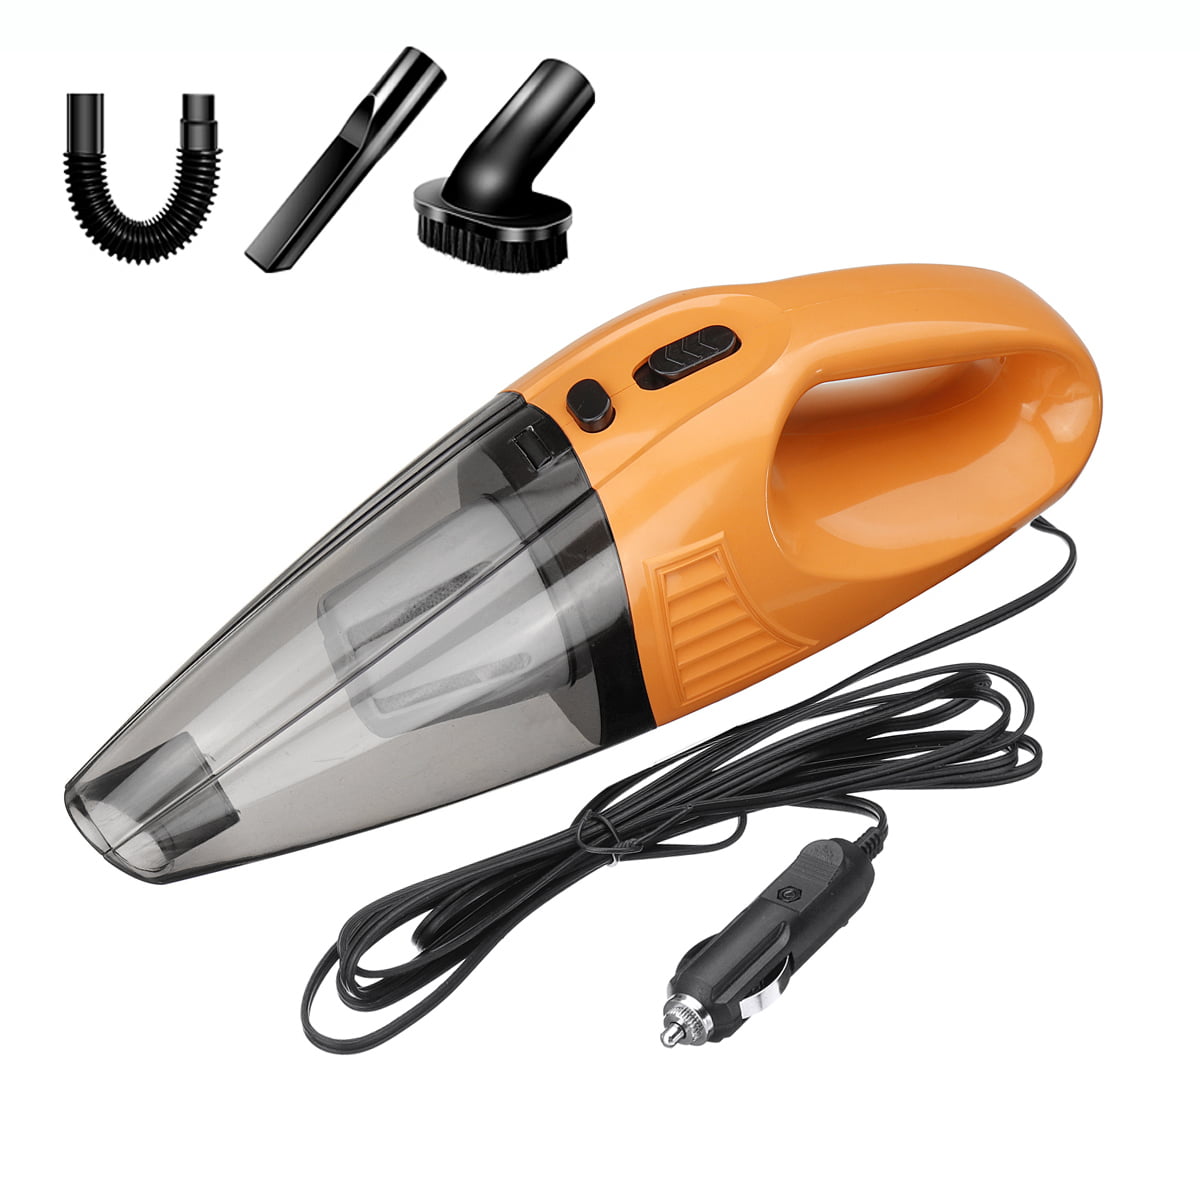 Car Vacuum Cleaner Duster Handheld Vac Wet And Dry Suction Hand Portable DC 12V 